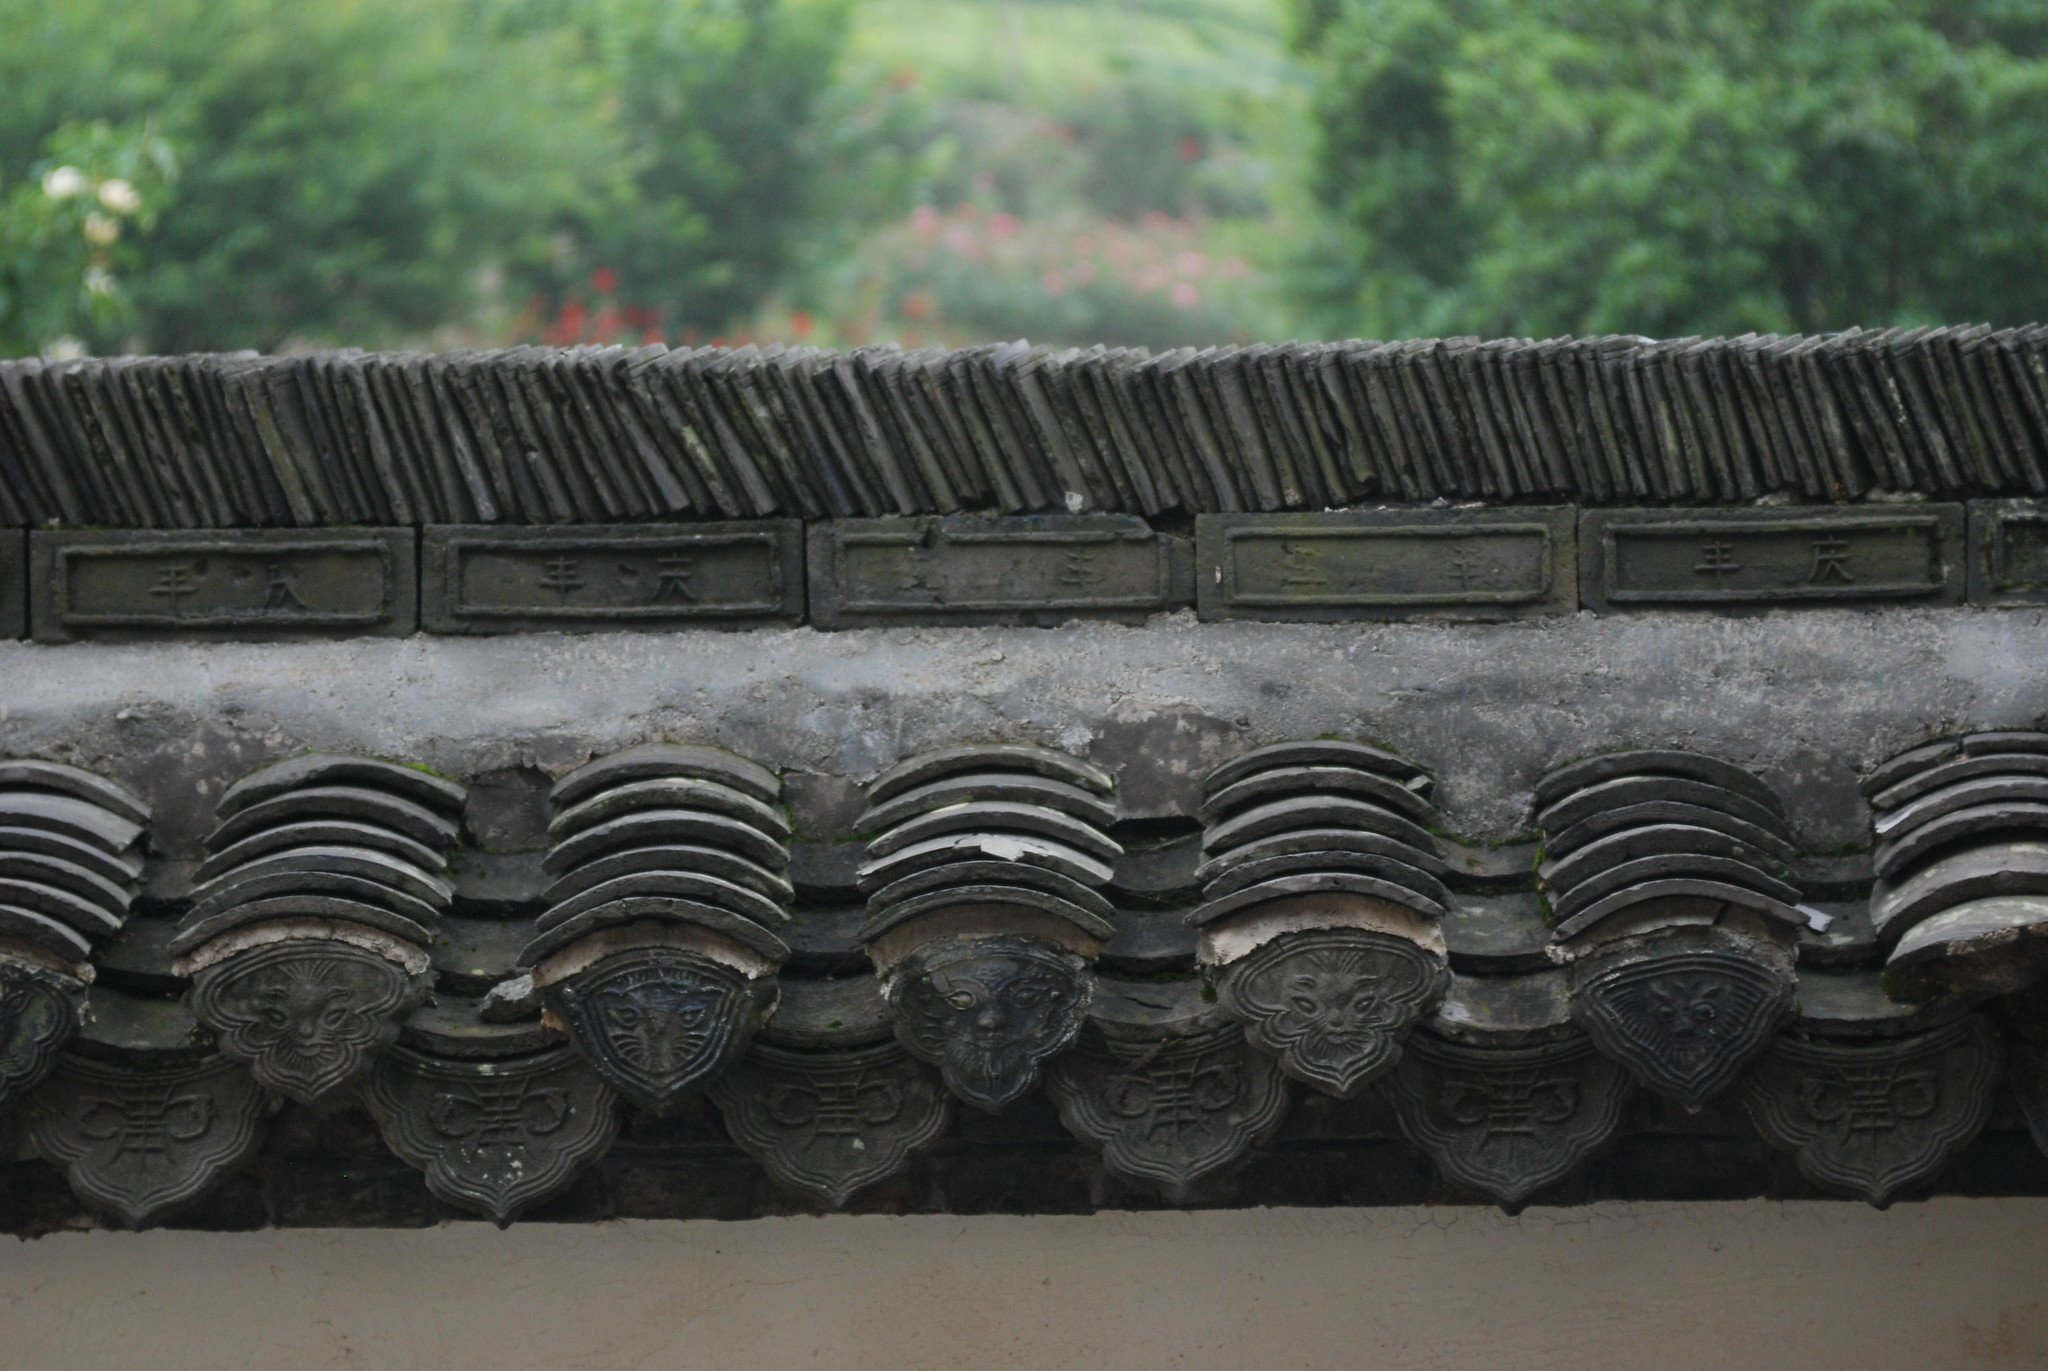 Close Up on the Tile Design on the Traditional Chinese Architecture Roof